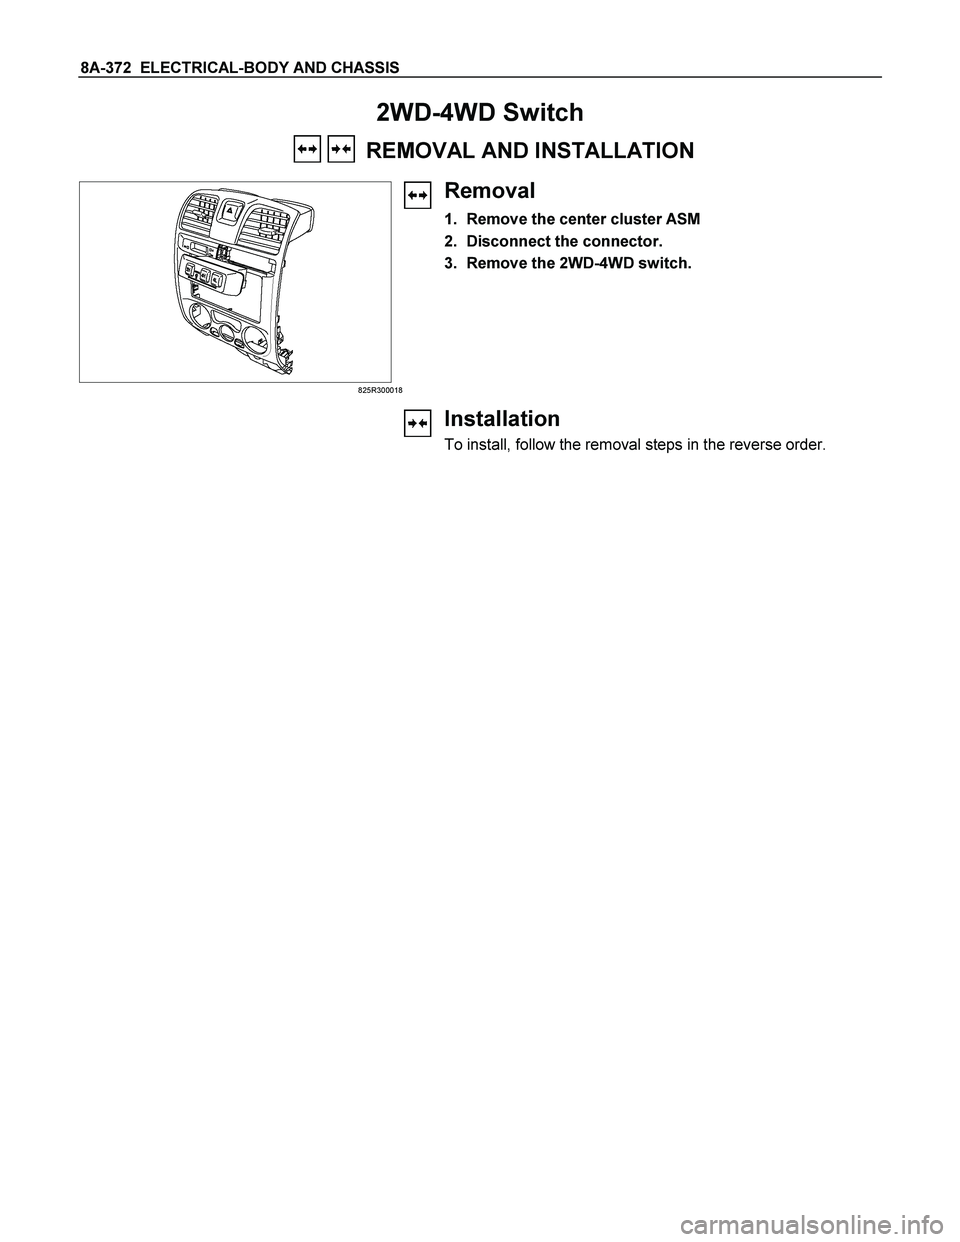 ISUZU TF SERIES 2004  Workshop Manual 8A-372  ELECTRICAL-BODY AND CHASSIS 
2WD-4WD Switch 
    REMOVAL AND INSTALLATION  
825R300018
 
Removal 
1.  Remove the center cluster ASM 
2.  Disconnect the connector. 
3.  Remove the 2WD-4WD switc